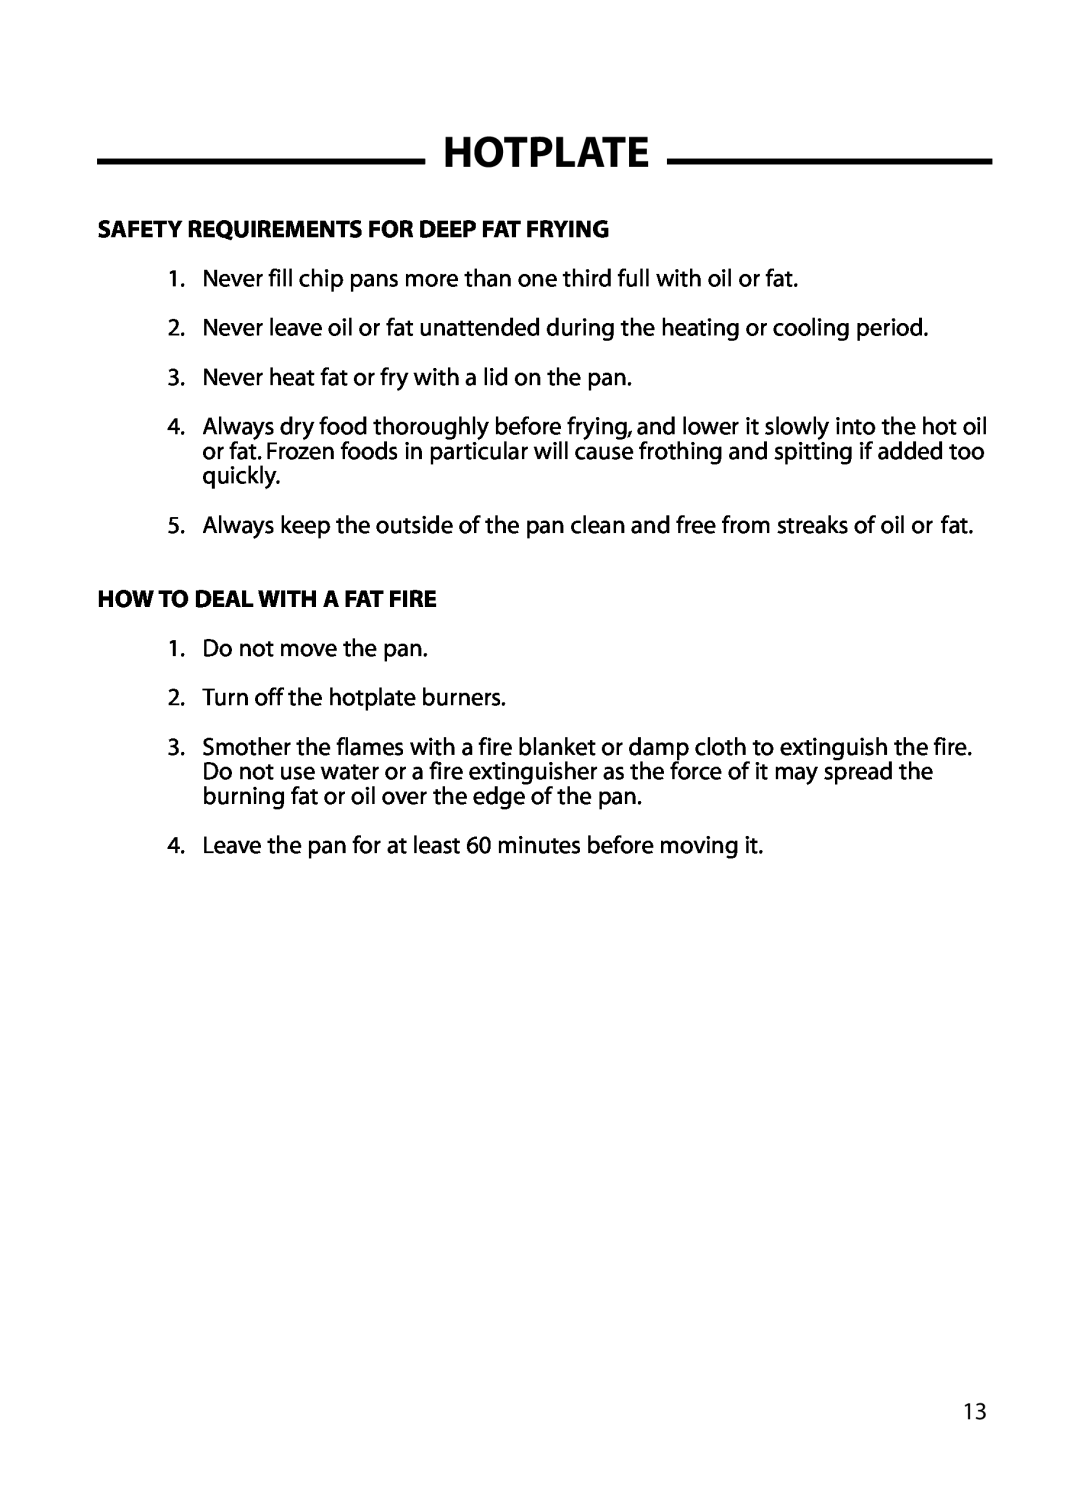 Cannon 10688 installation instructions Safety Requirements For Deep Fat Frying, How To Deal With A Fat Fire, Hotplate 